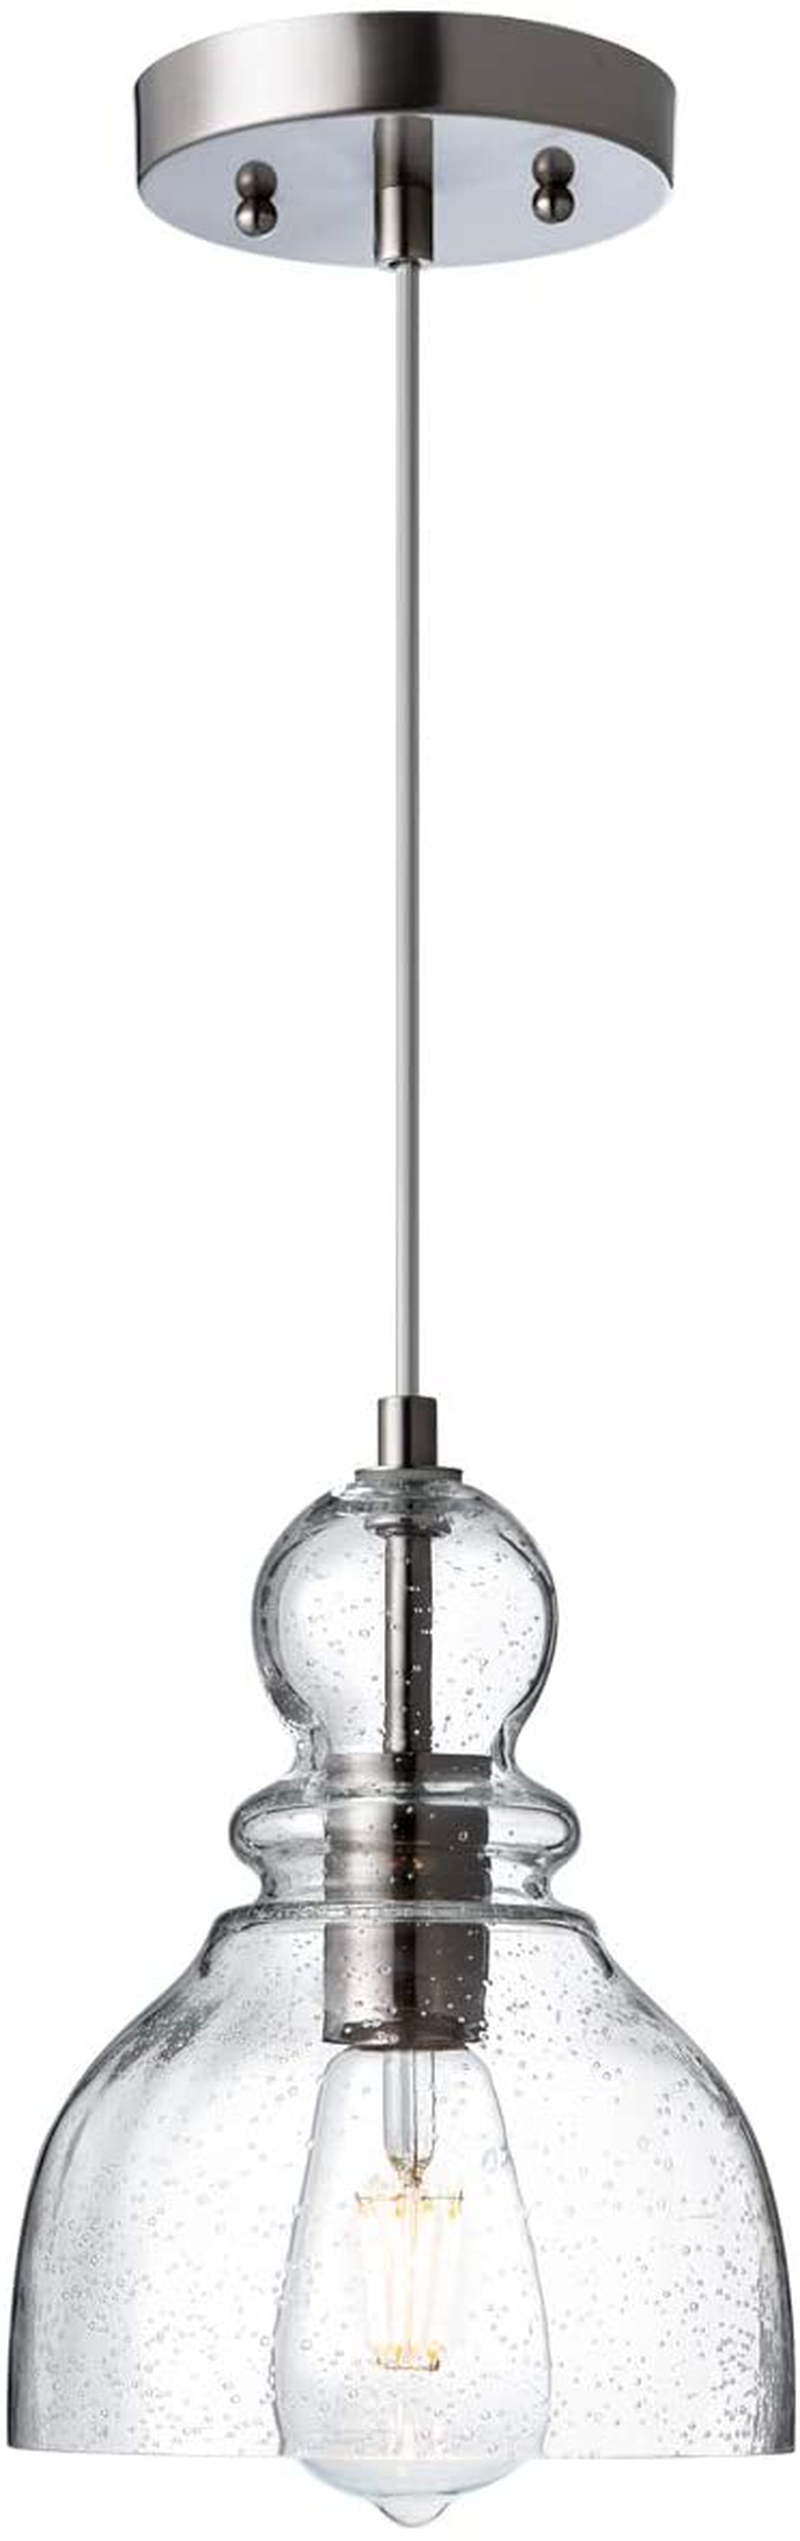 LANROS Industrial Mini Pendant Lighting with Handblown Clear Seeded Glass Shade, Adjustable Cord Farmhouse Lamp Ceiling Pendant Light Fixture for Kitchen Island Restaurant Kitchen Sink, Black, 1 Pack Home & Garden > Lighting > Lighting Fixtures LANROS Brushed Nickle 7 inch 